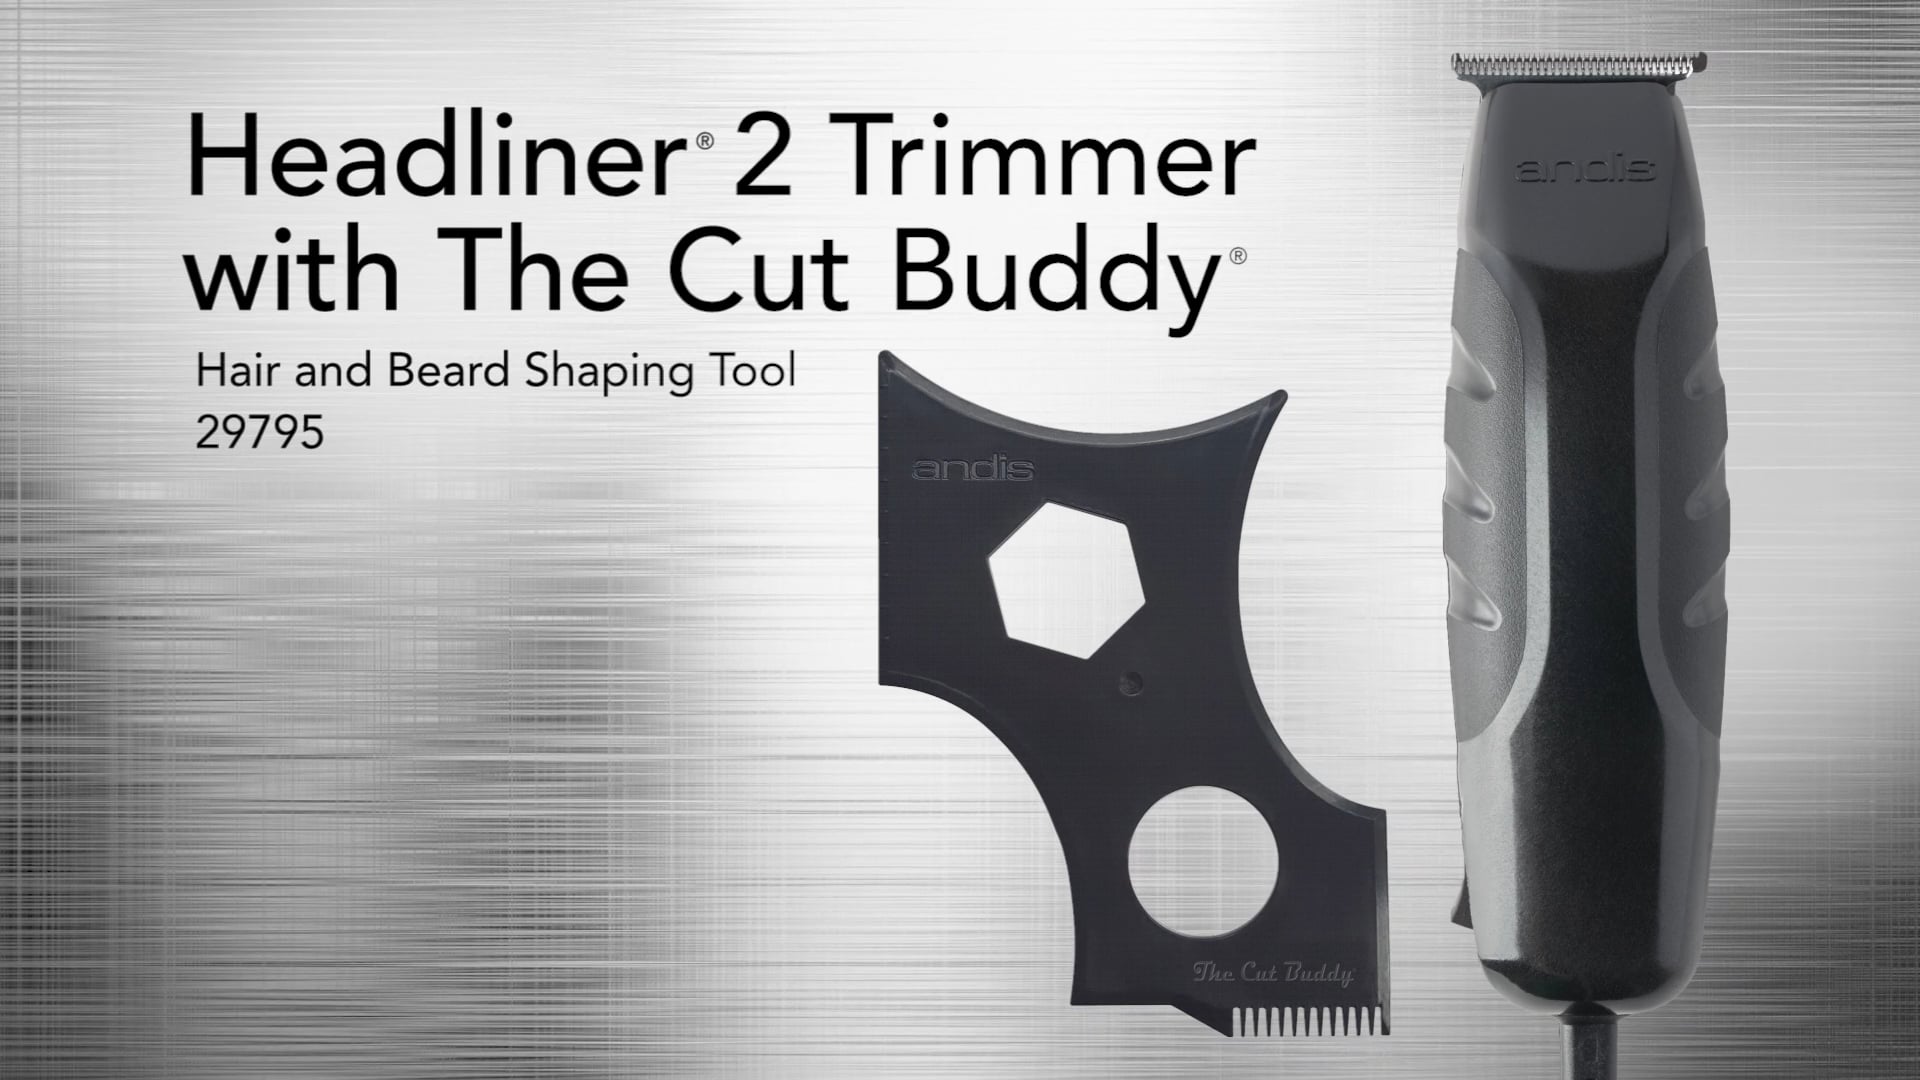 29795 Headliner 2 Trimmer with The Cut Buddy on Vimeo